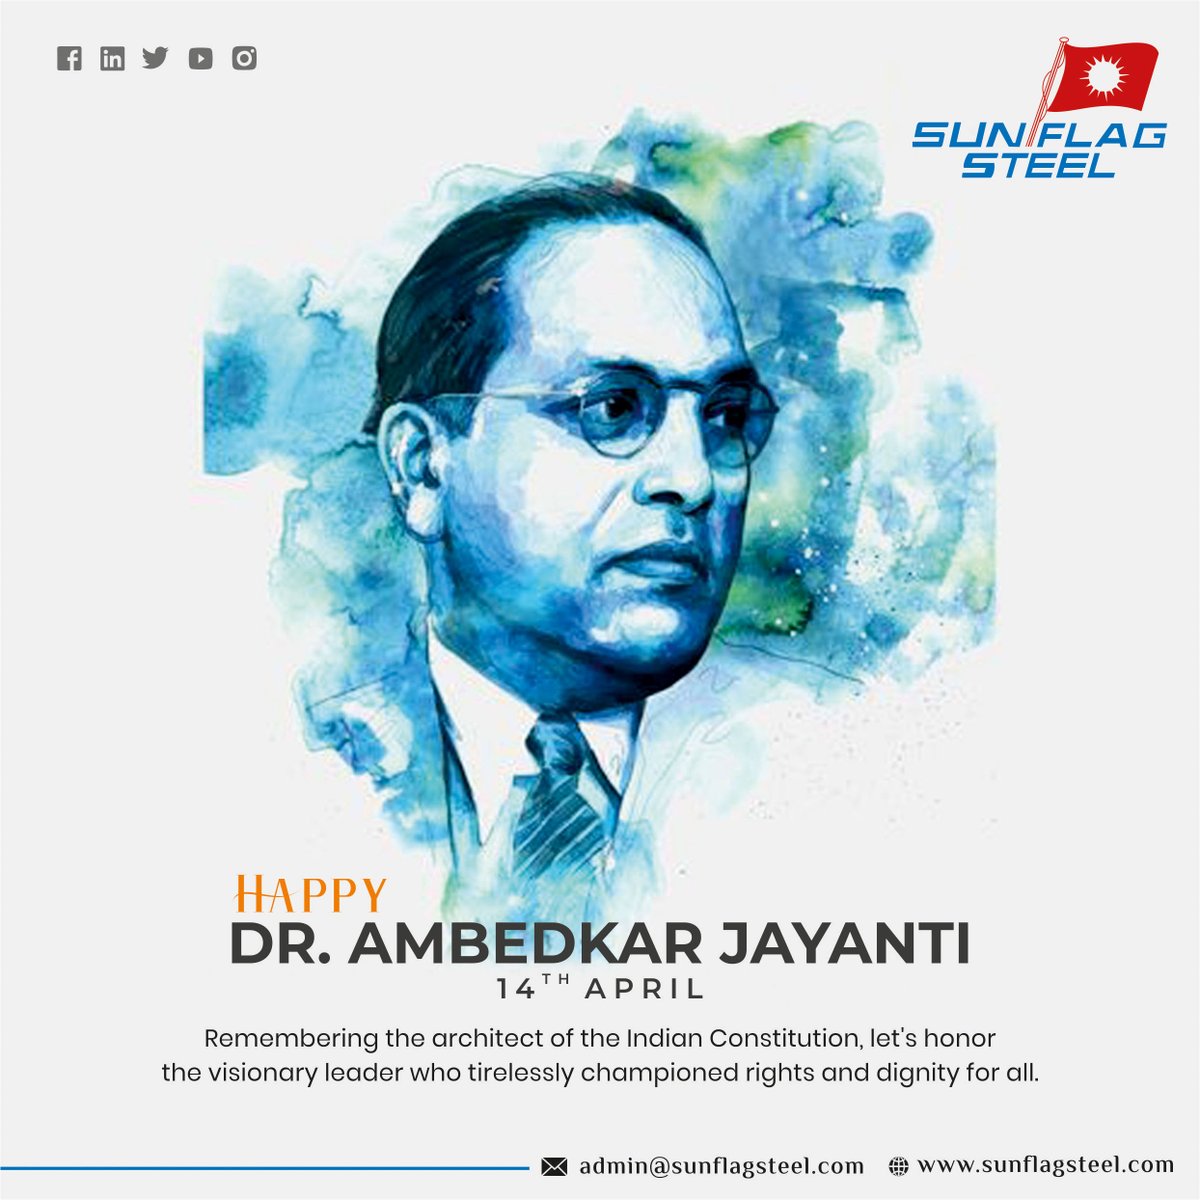 #SunflagSteel honors Dr. B.R. Ambedkar, advocating for justice and equality. Let's walk his path for a better tomorrow. #AmbedkarJayanti #BRAmbedkar #DrAmbedkar #SocialJustice #EqualityForAll #IndianConstitution #DalitRights #JusticeForAll #HumanRights #Sunflag #Steel